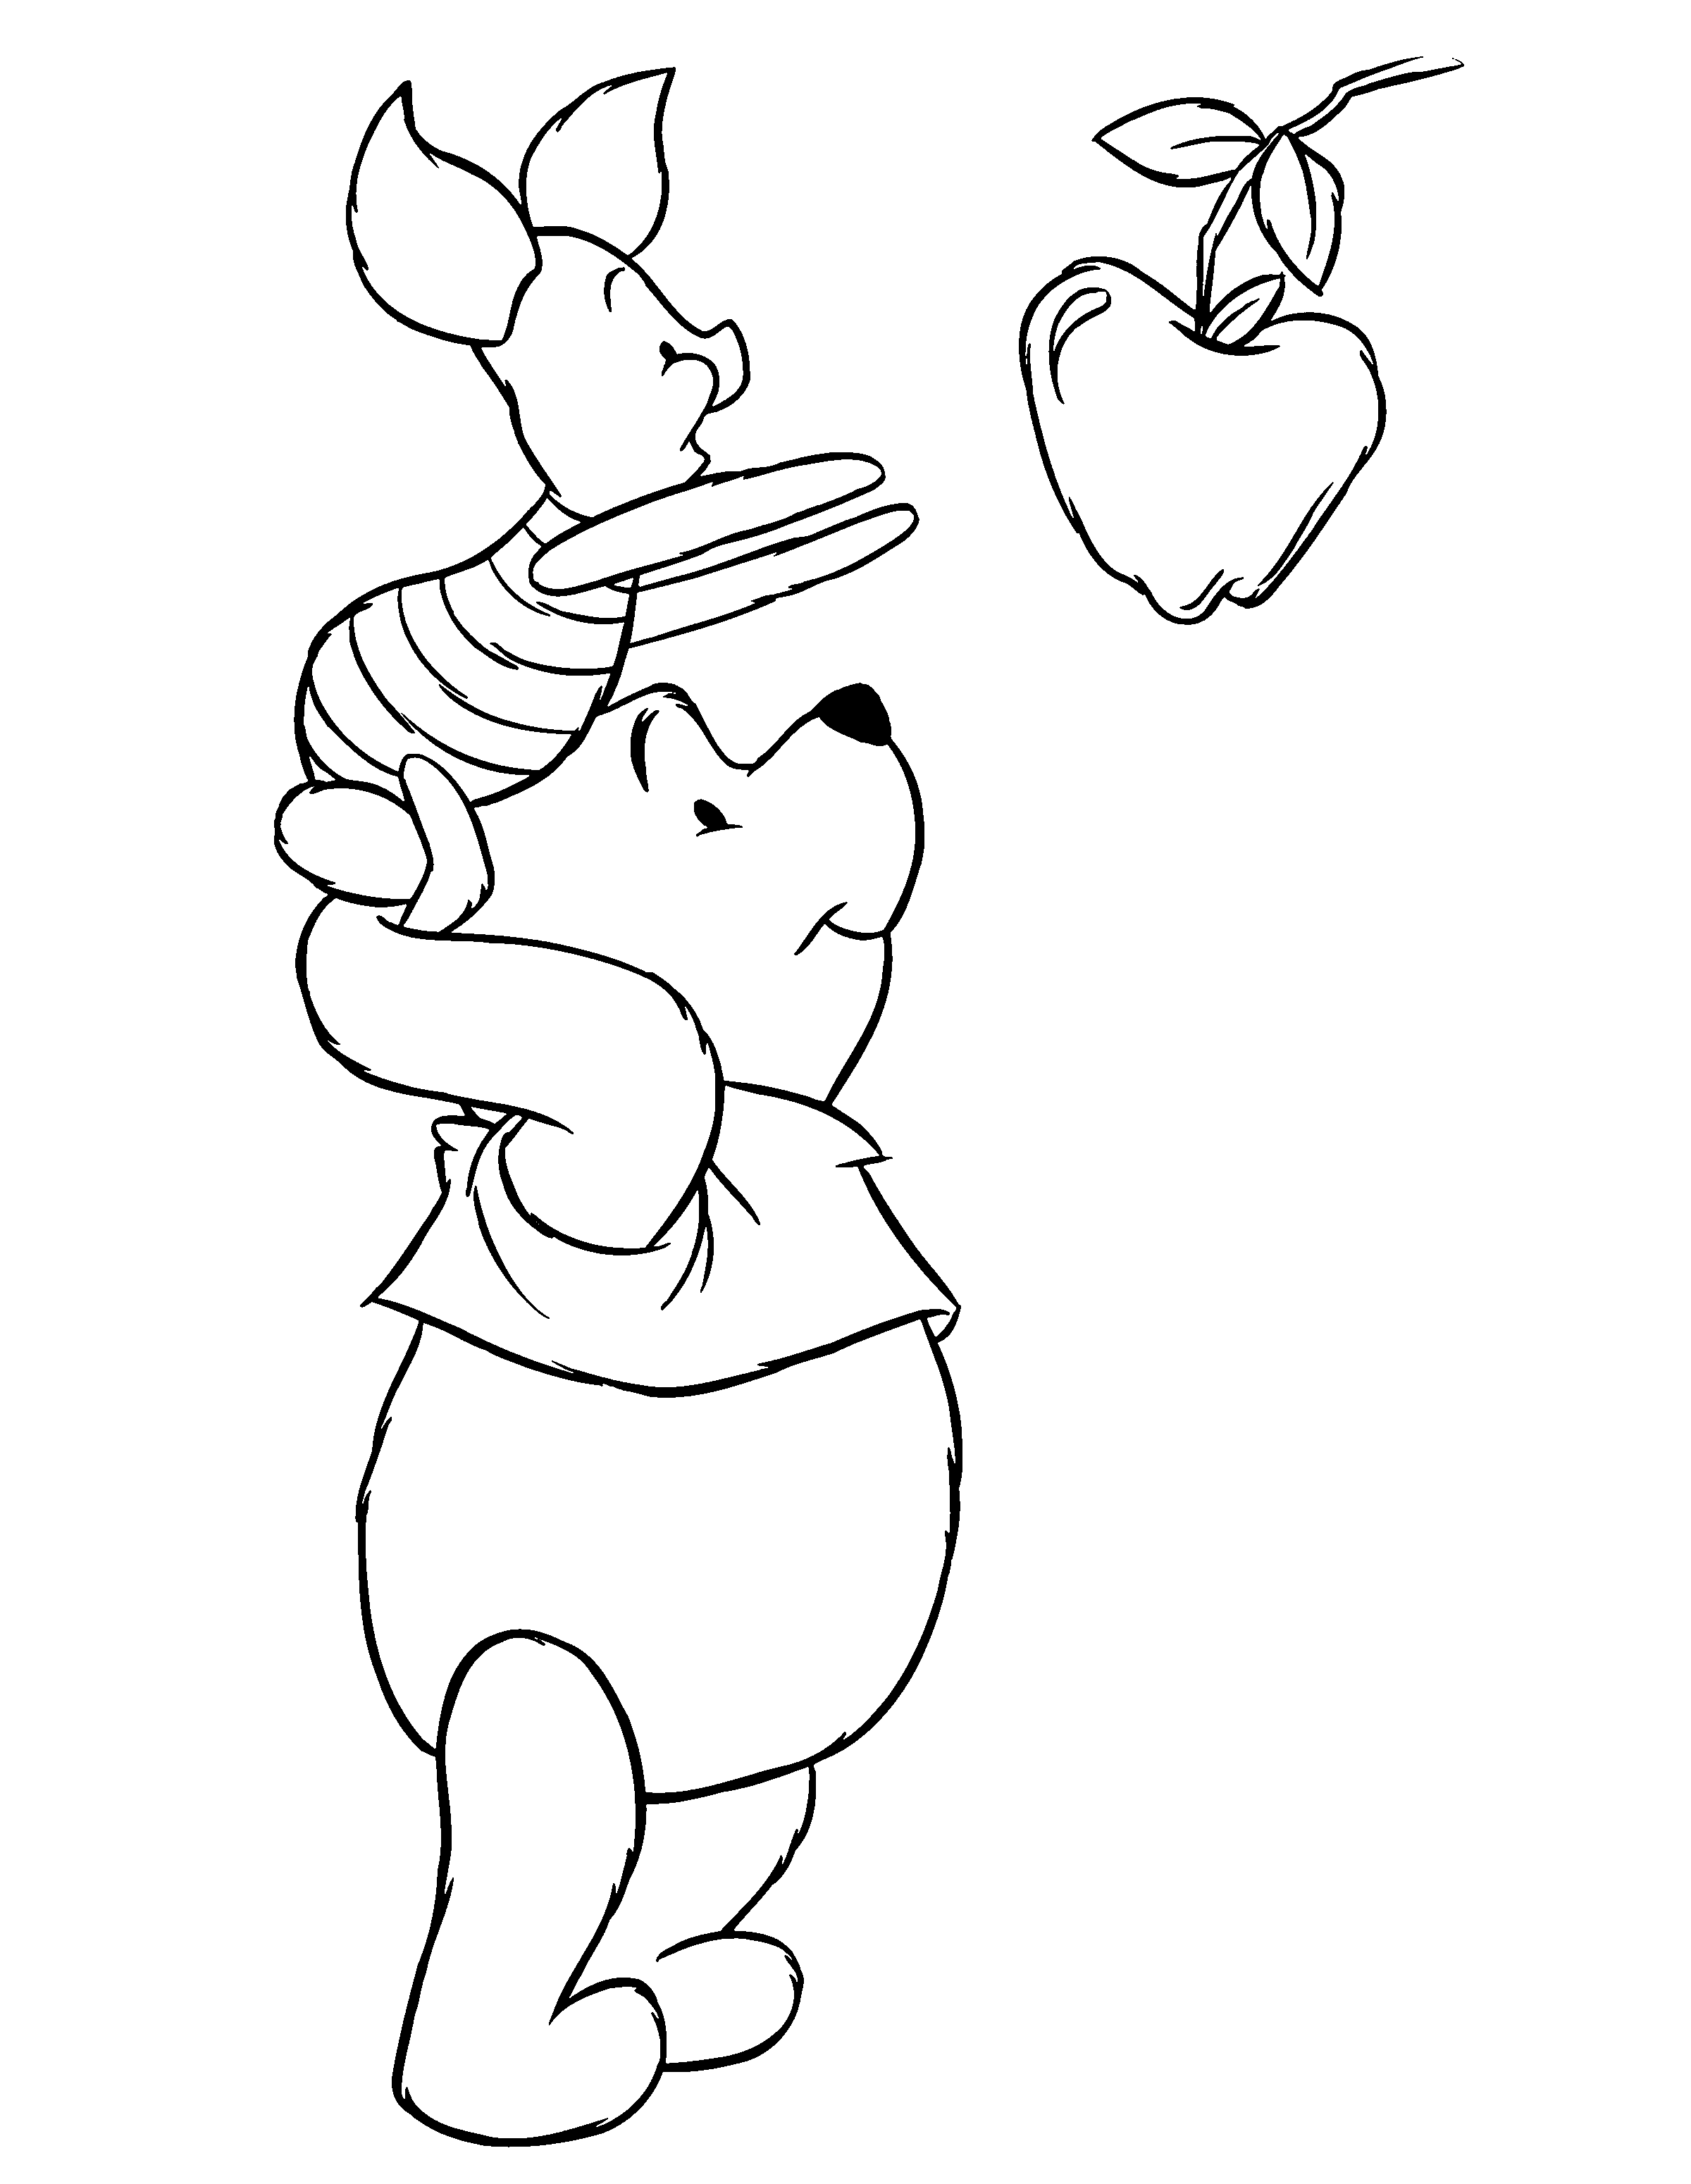 animated-coloring-pages-winnie-the-pooh-image-0062